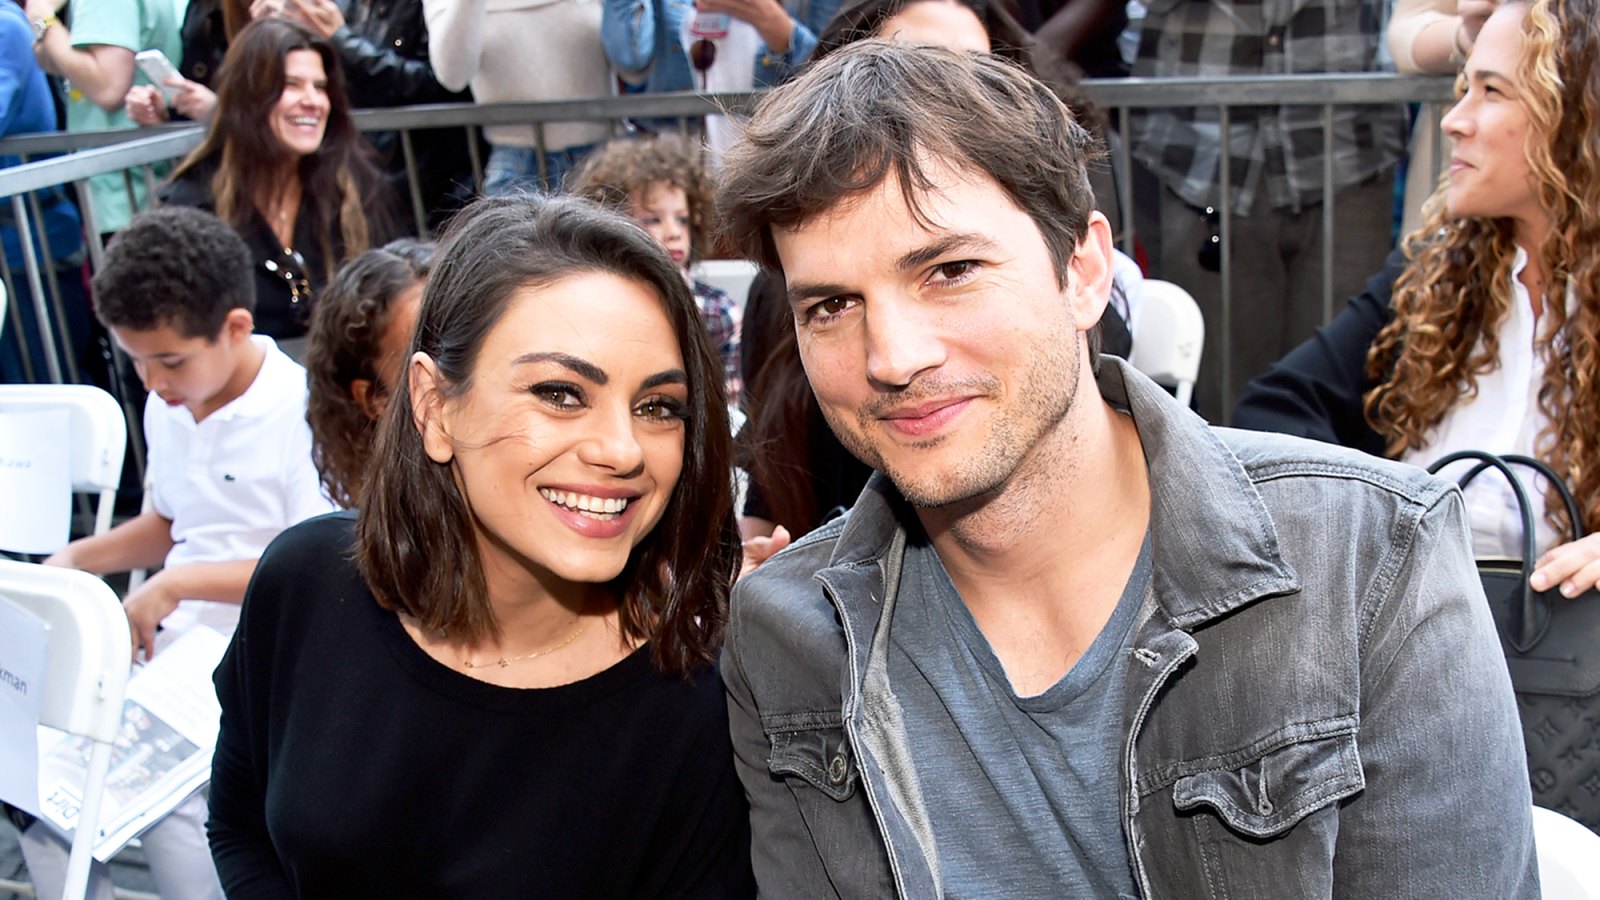 Mila Kunis and Ashton Kutcher at the Walk of Fame Star Ceremony on May 3, 2018 in Hollywood, California.